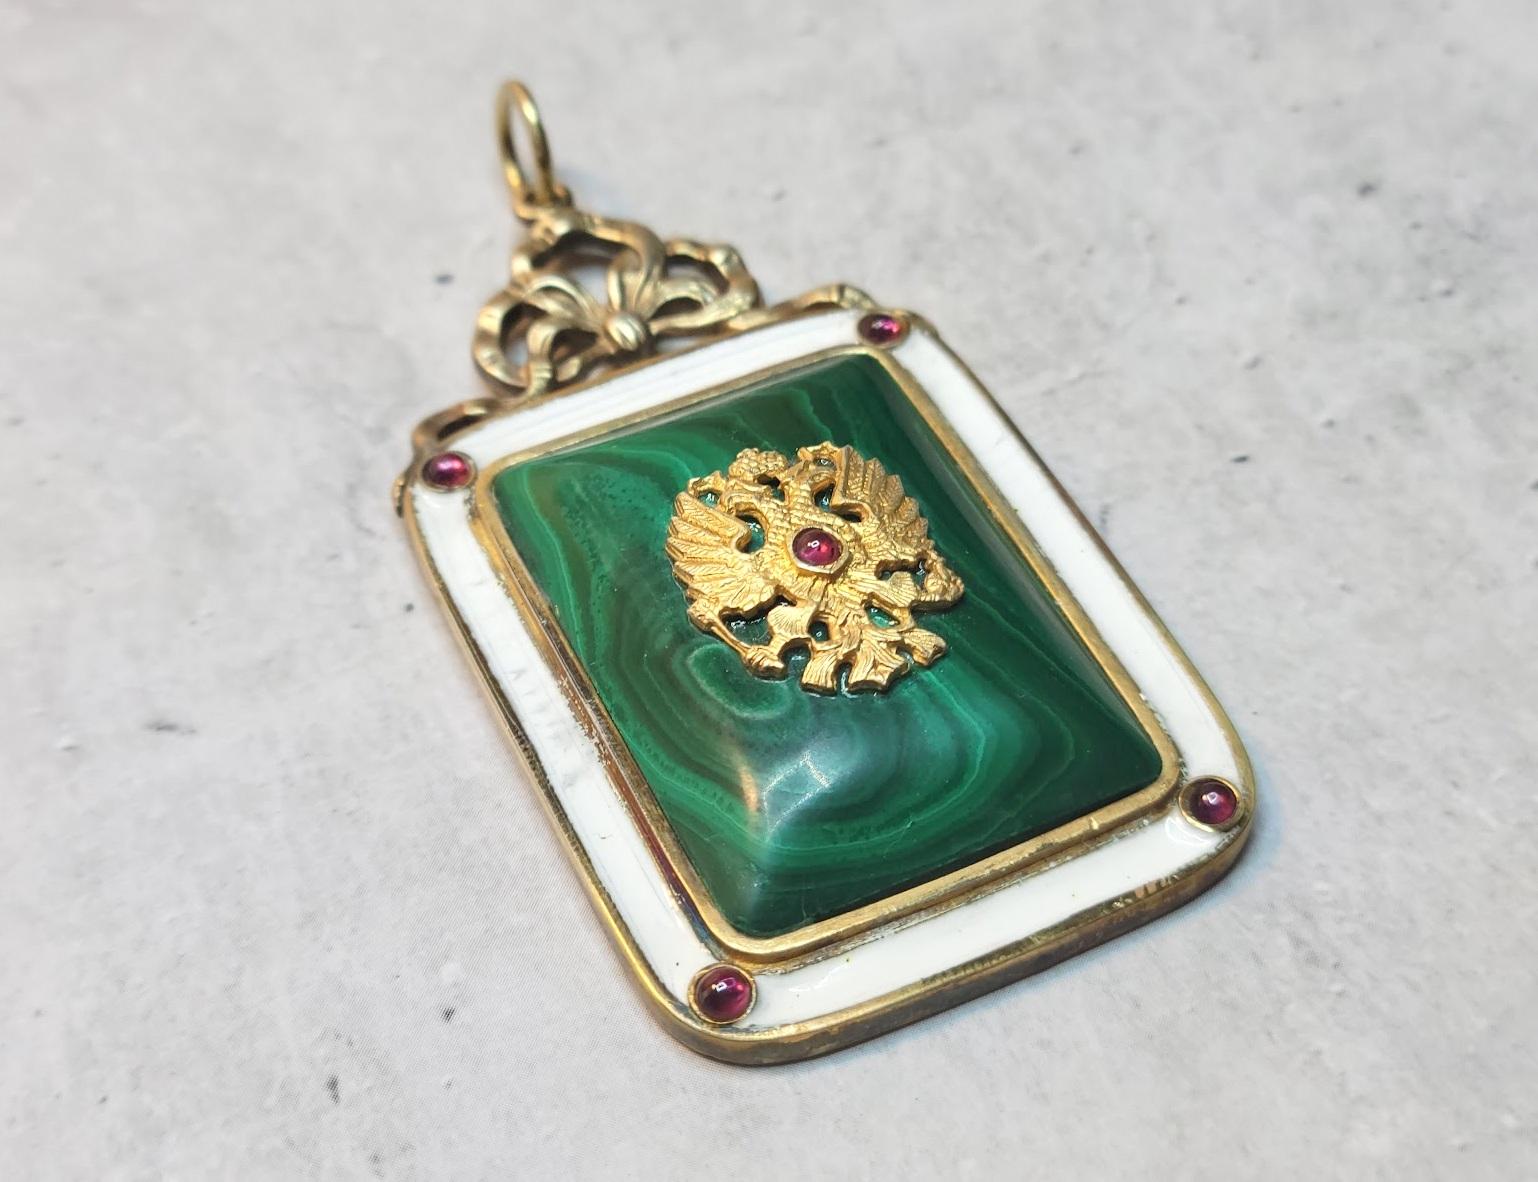 Imperial silver gilded pendant of Russian origin, with malachite inlay and decorated with a double-headed eagle—the Coat Of Arms of the Russian Empire. It is bordered by white enamel and complemented by five small garnet cabochons. 
On the reverse